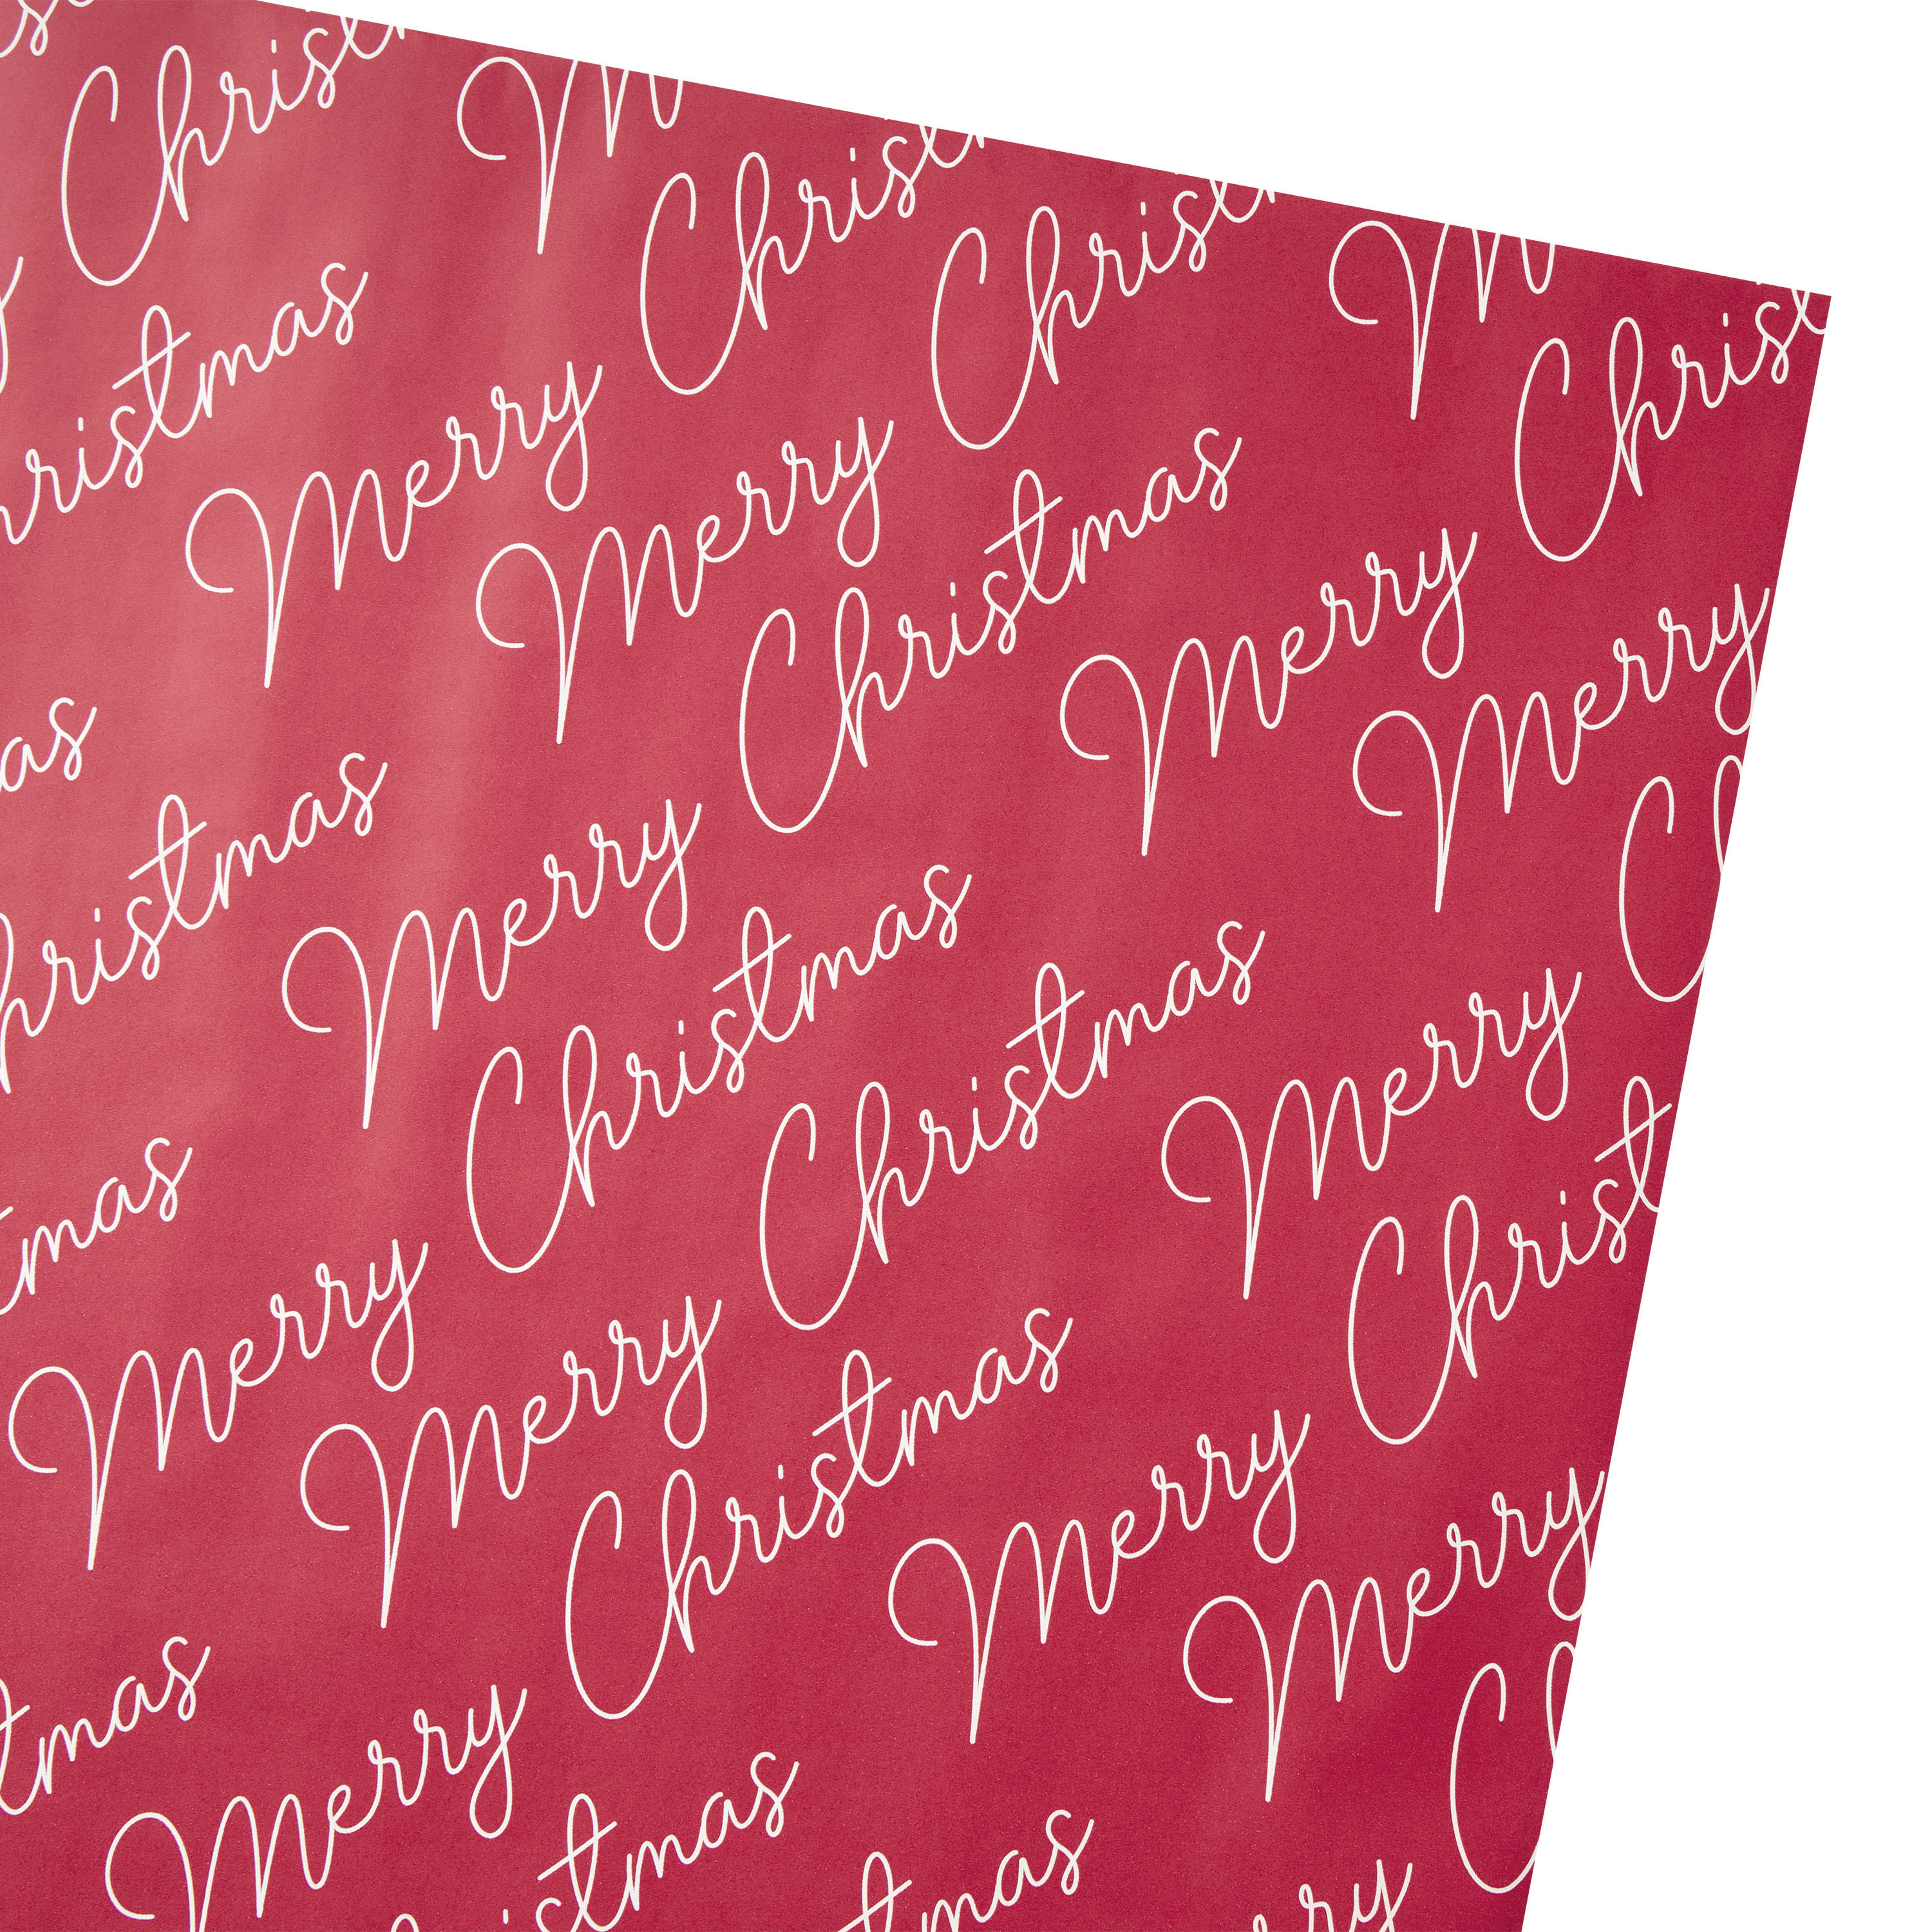 Bacon-scented wrapping paper is a thing: Here's how to get it 